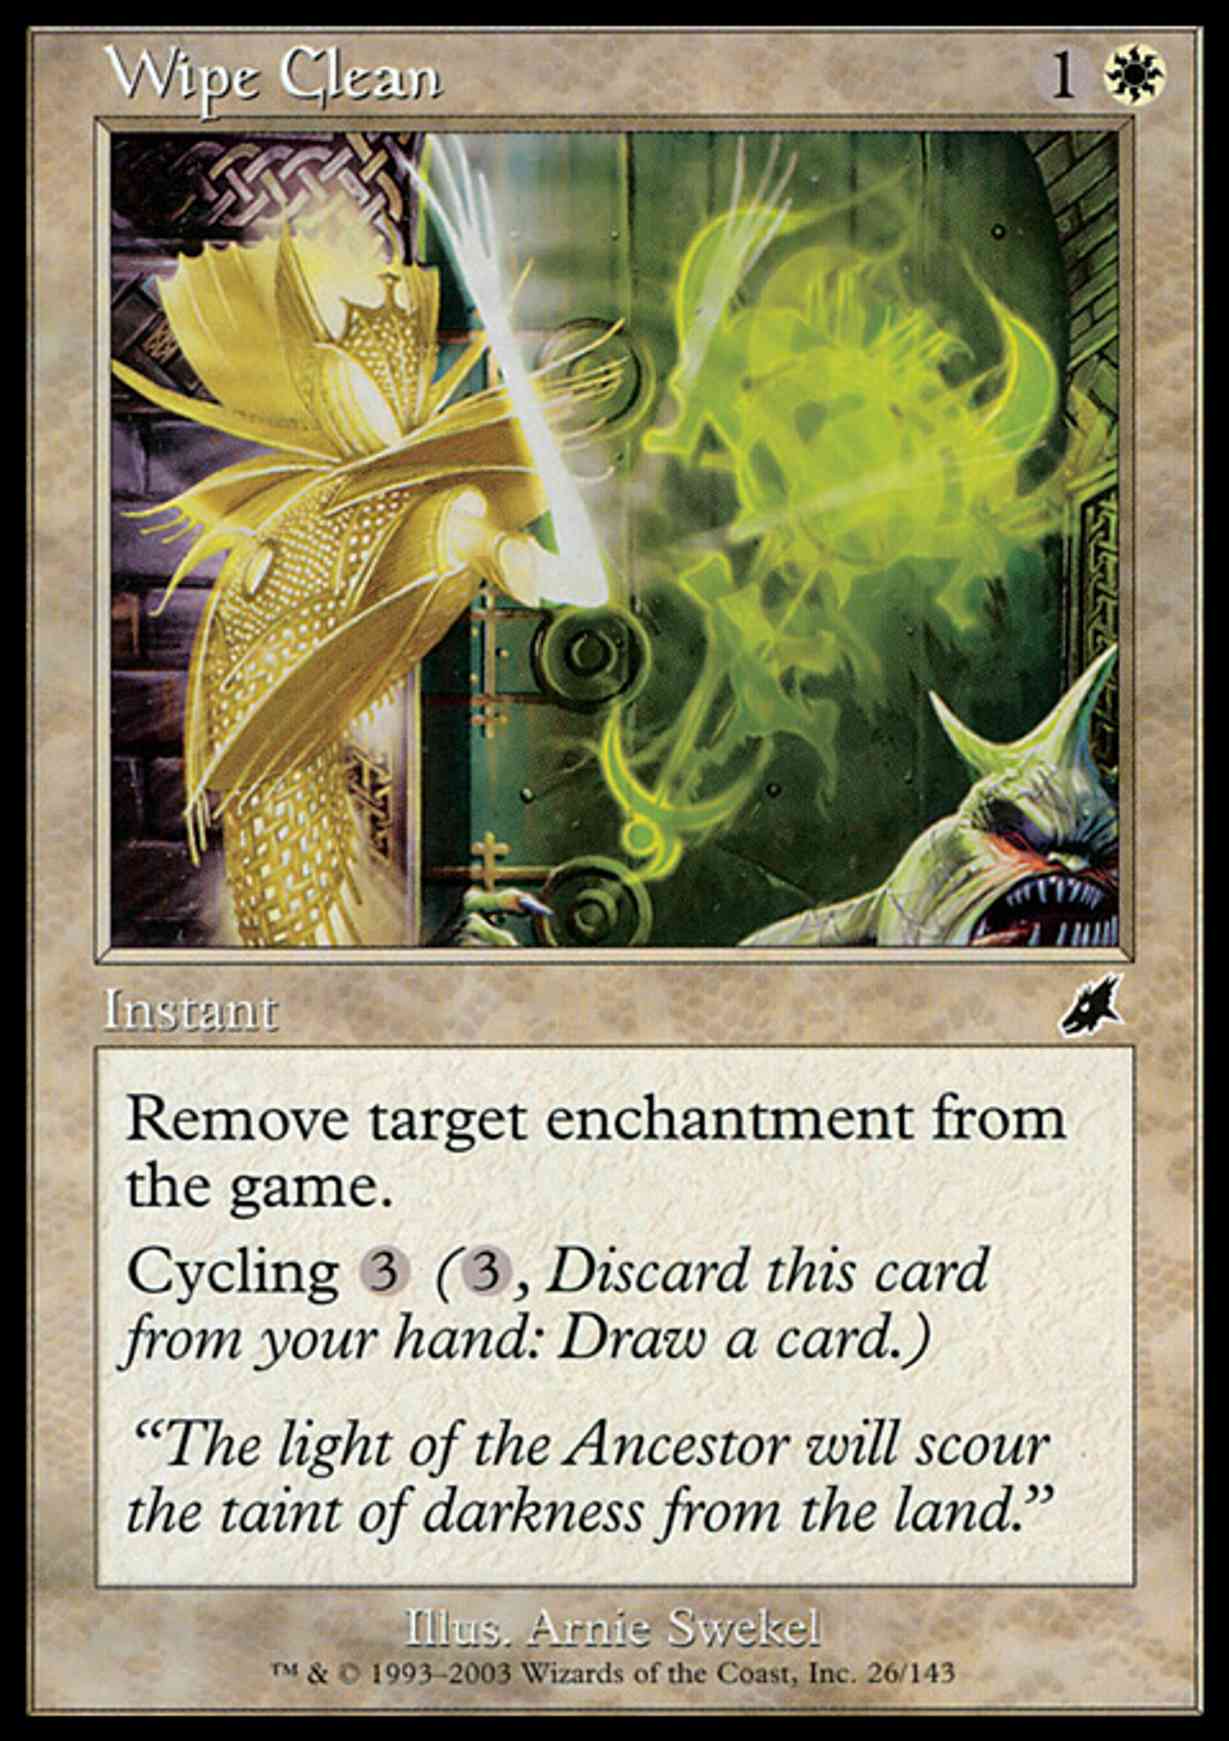 Wipe Clean magic card front